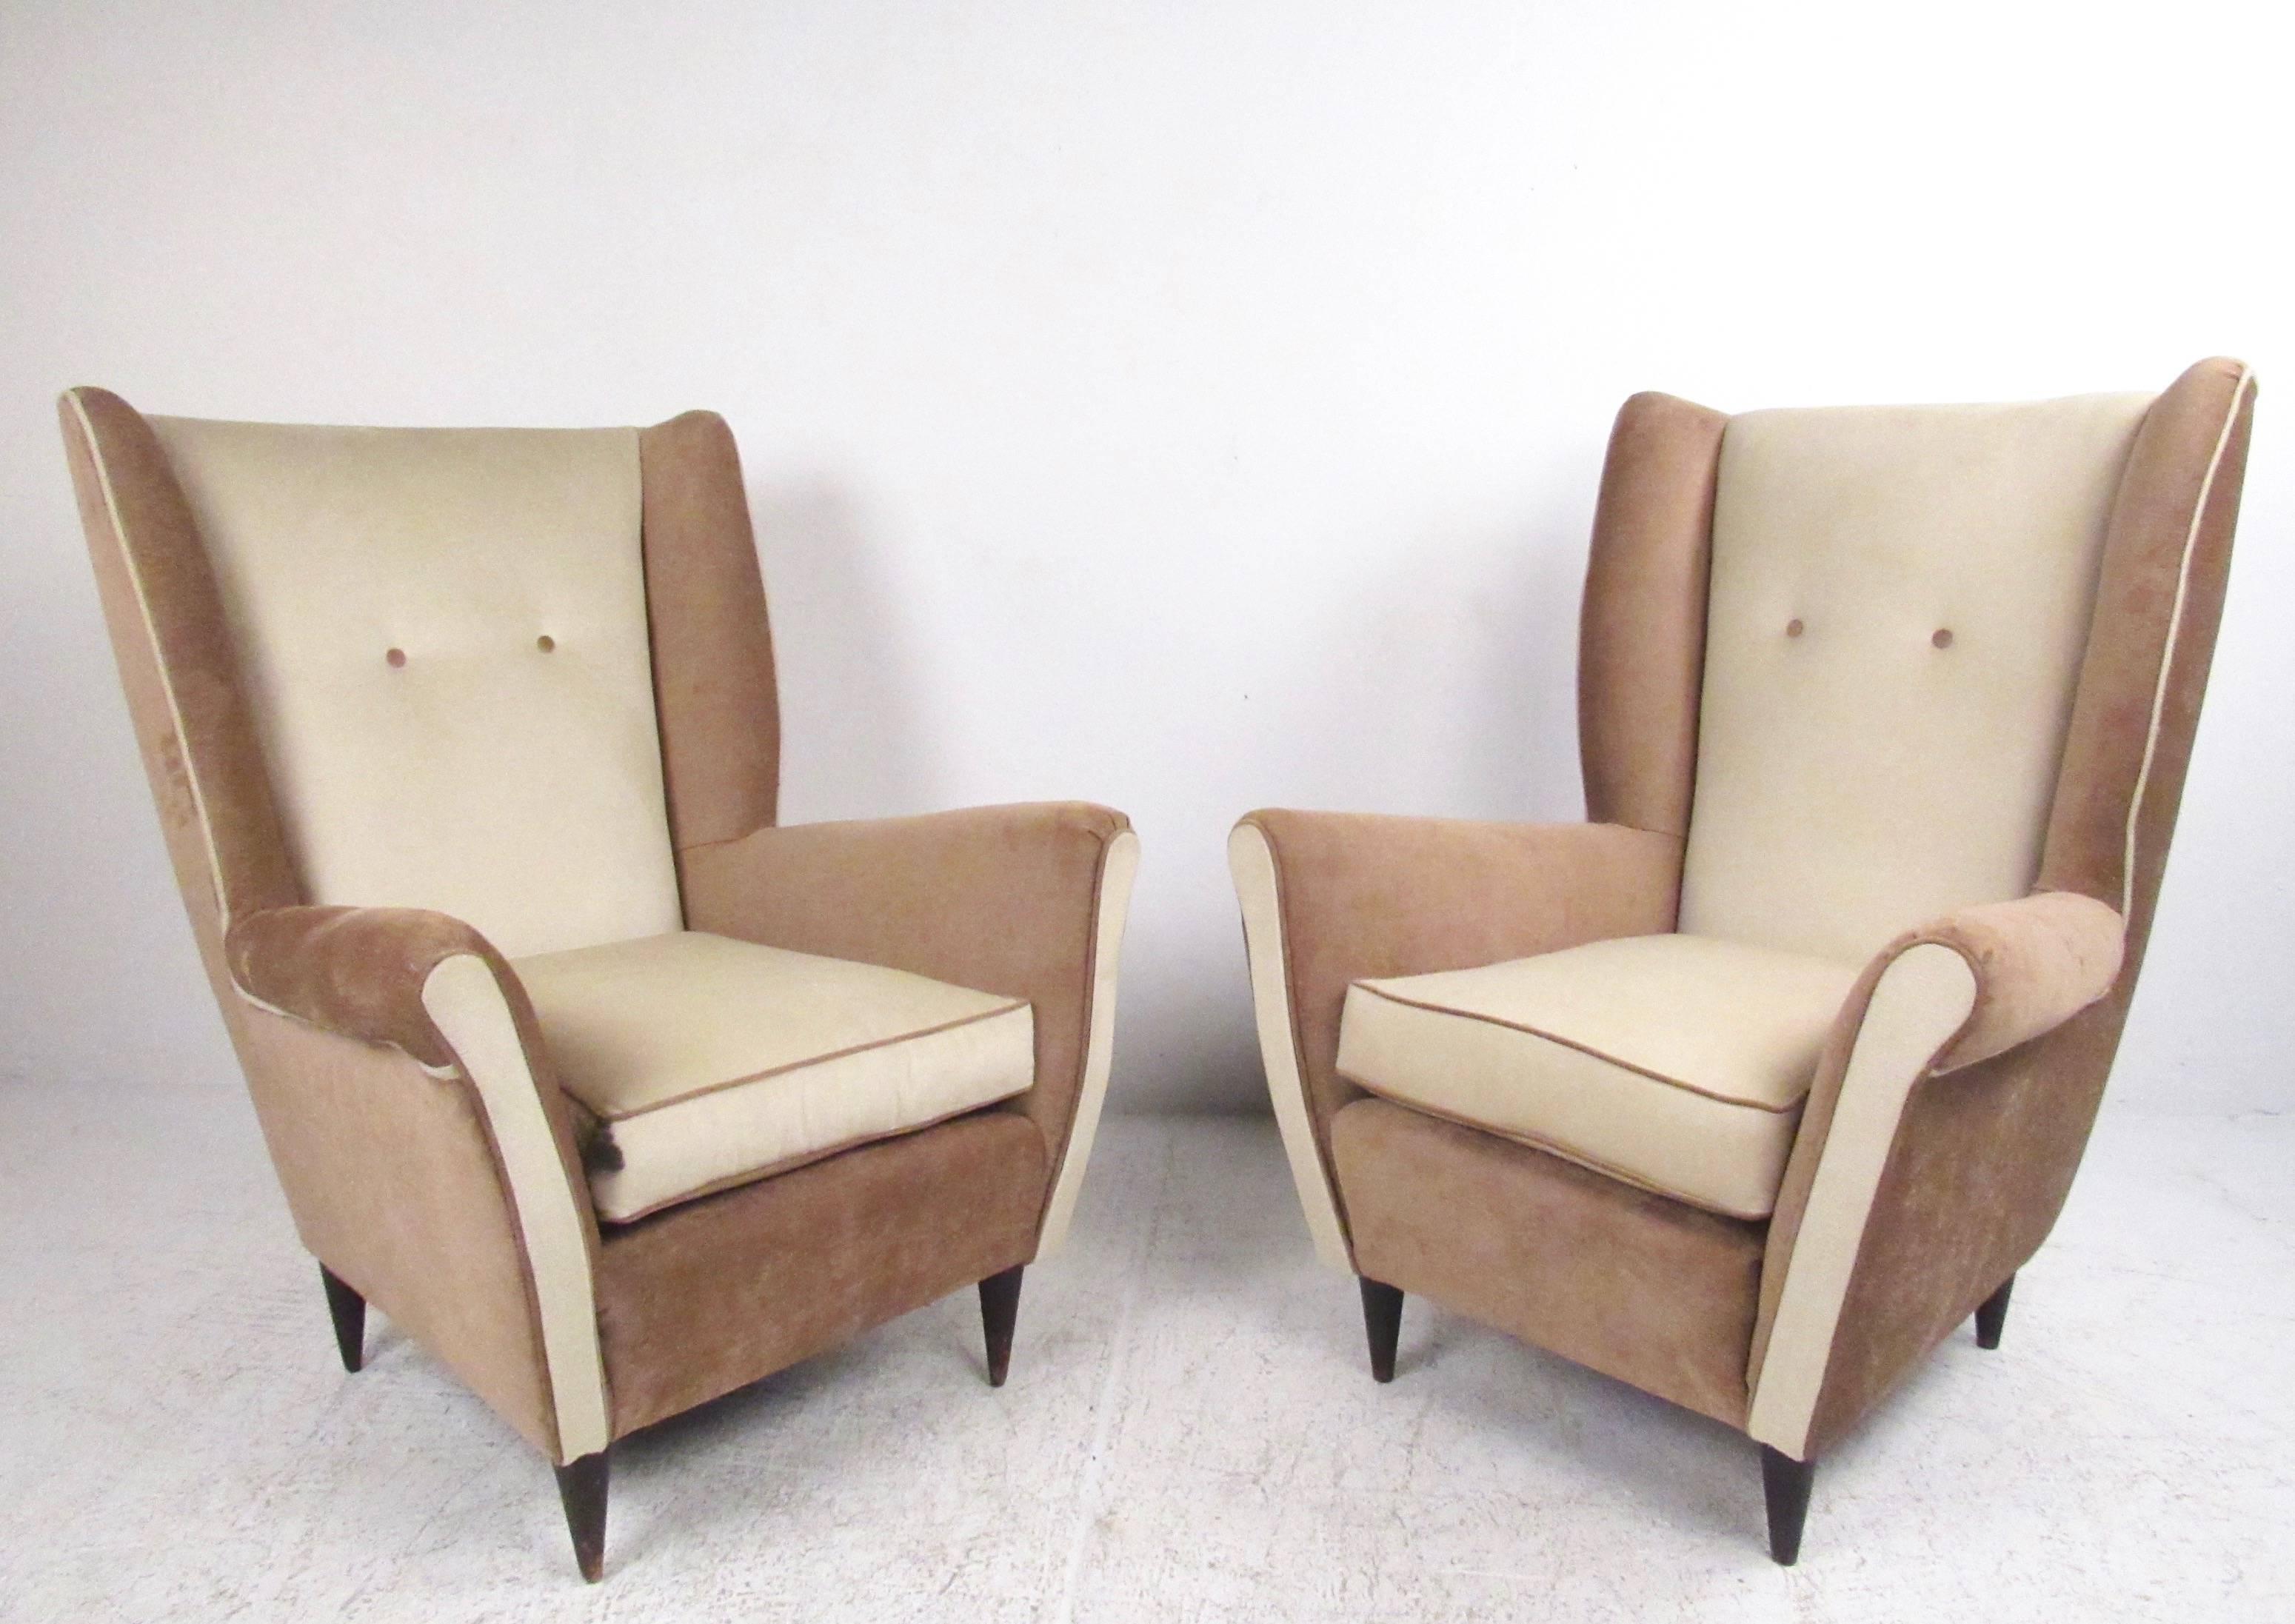 This stylish pair of Mid-Century lounge chairs feature high sculpted seat backs, comfortable and accommodating seats and tapered hardwood legs. Exquisite two tone fabric is complimented by trim piping and button tufted seat backs. Perfect pair of